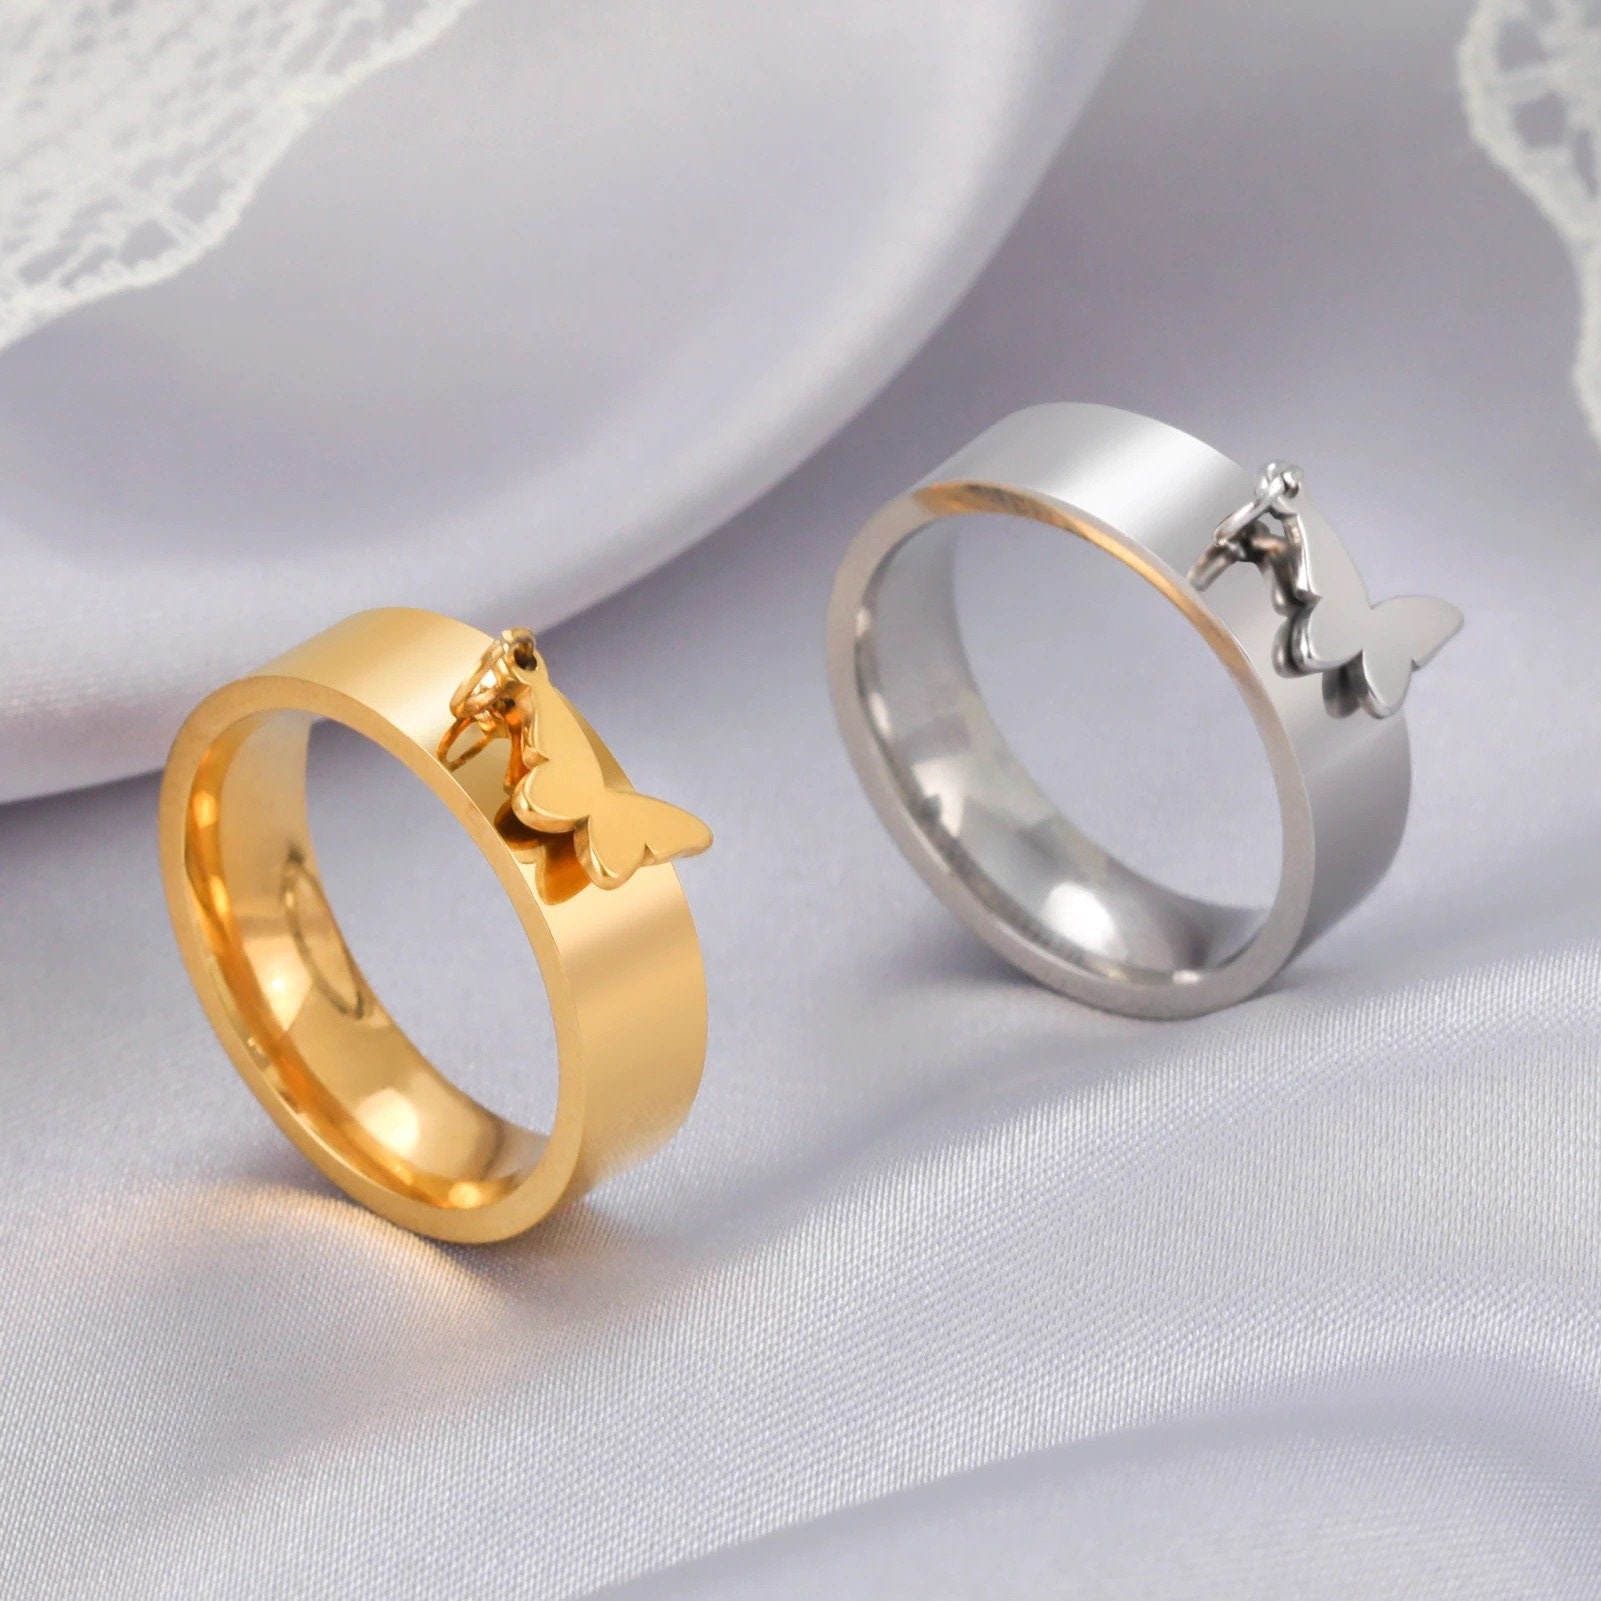 Unique matching wedding bands. Couple rings set